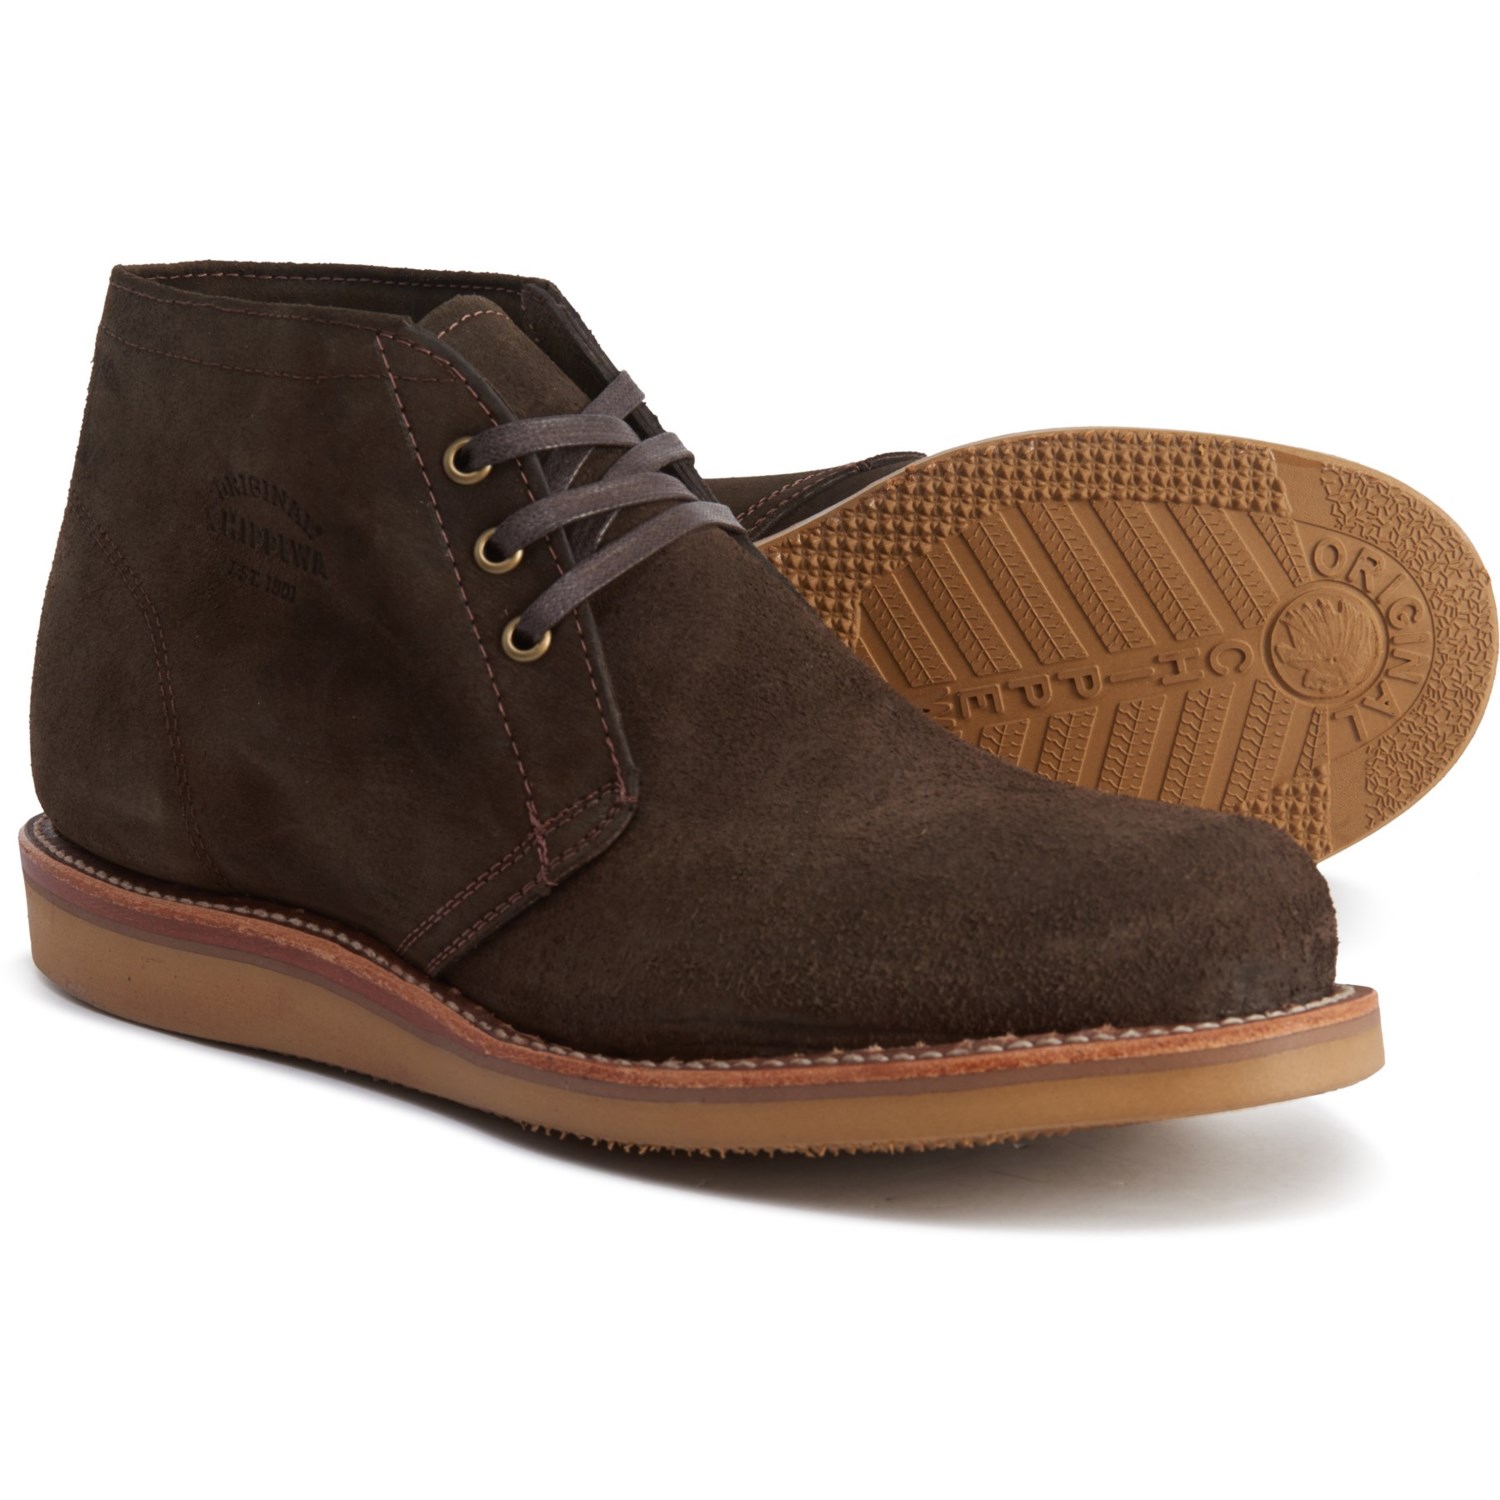 navy suede chukka boots